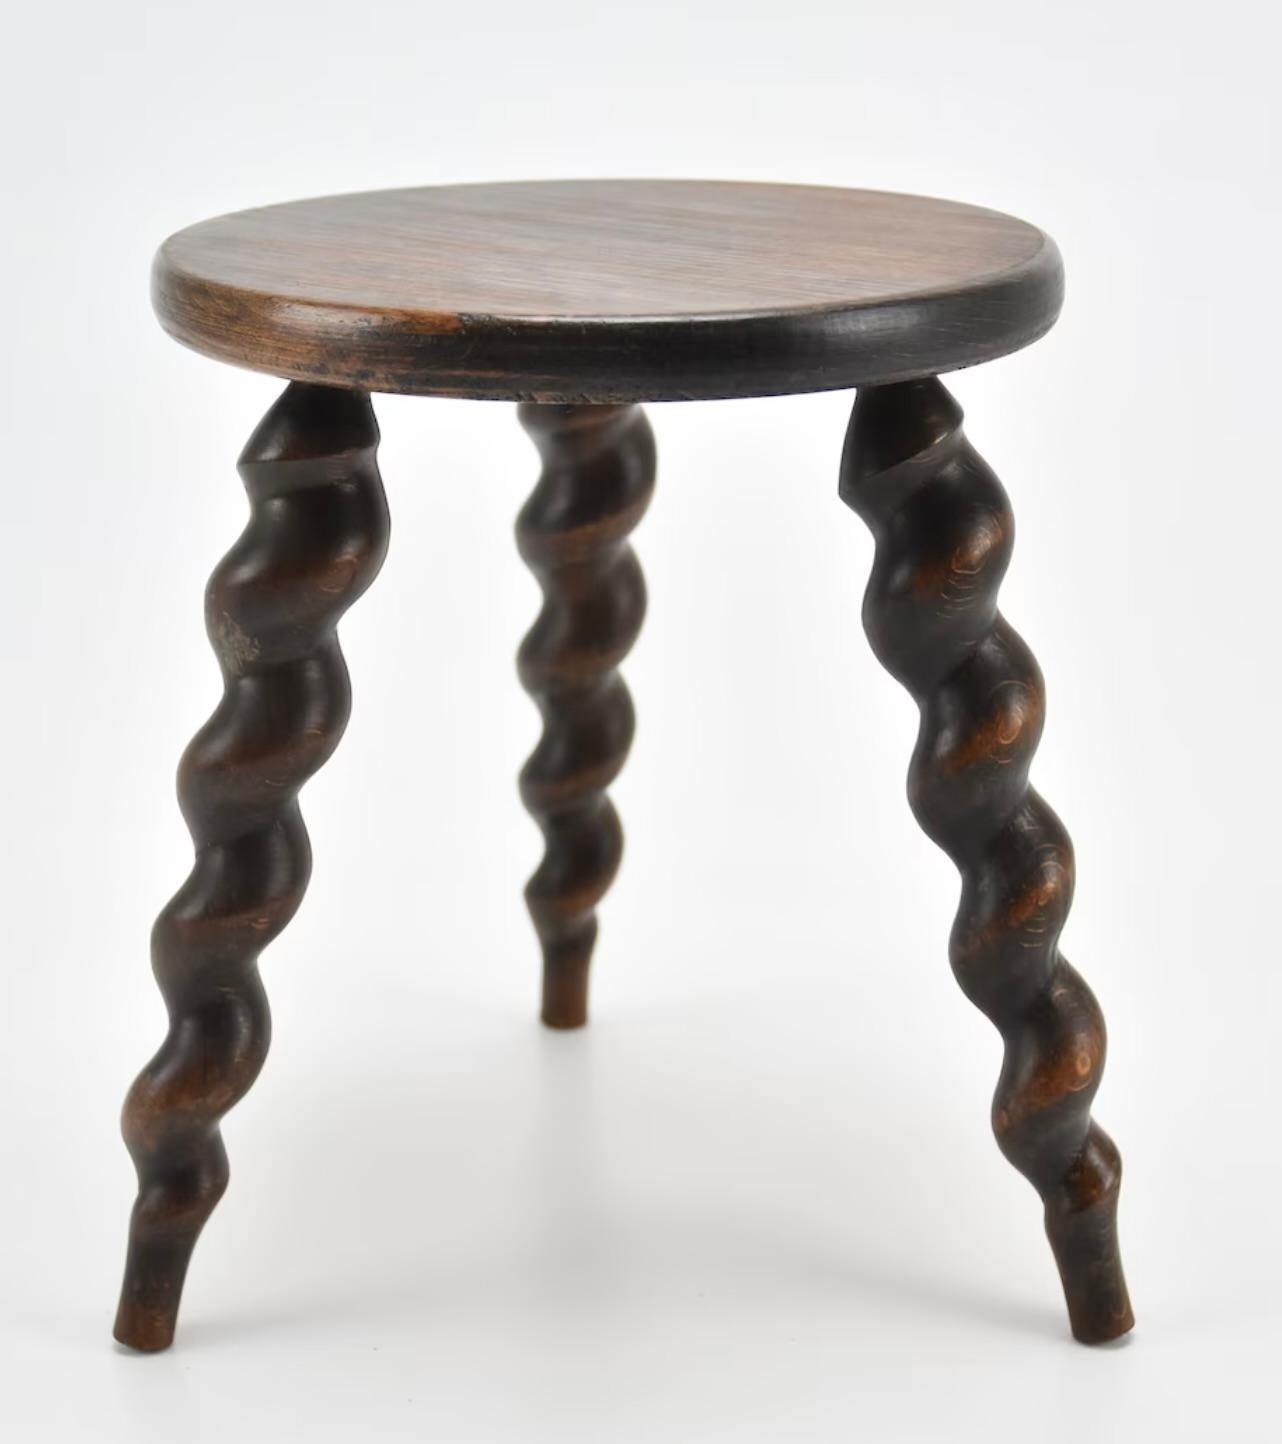 Beautiful wooden stool made in France, circa 1950s. Amazing craftsmanship on spiral legs. Great patina and grain. See photos for condition and coloring.
 